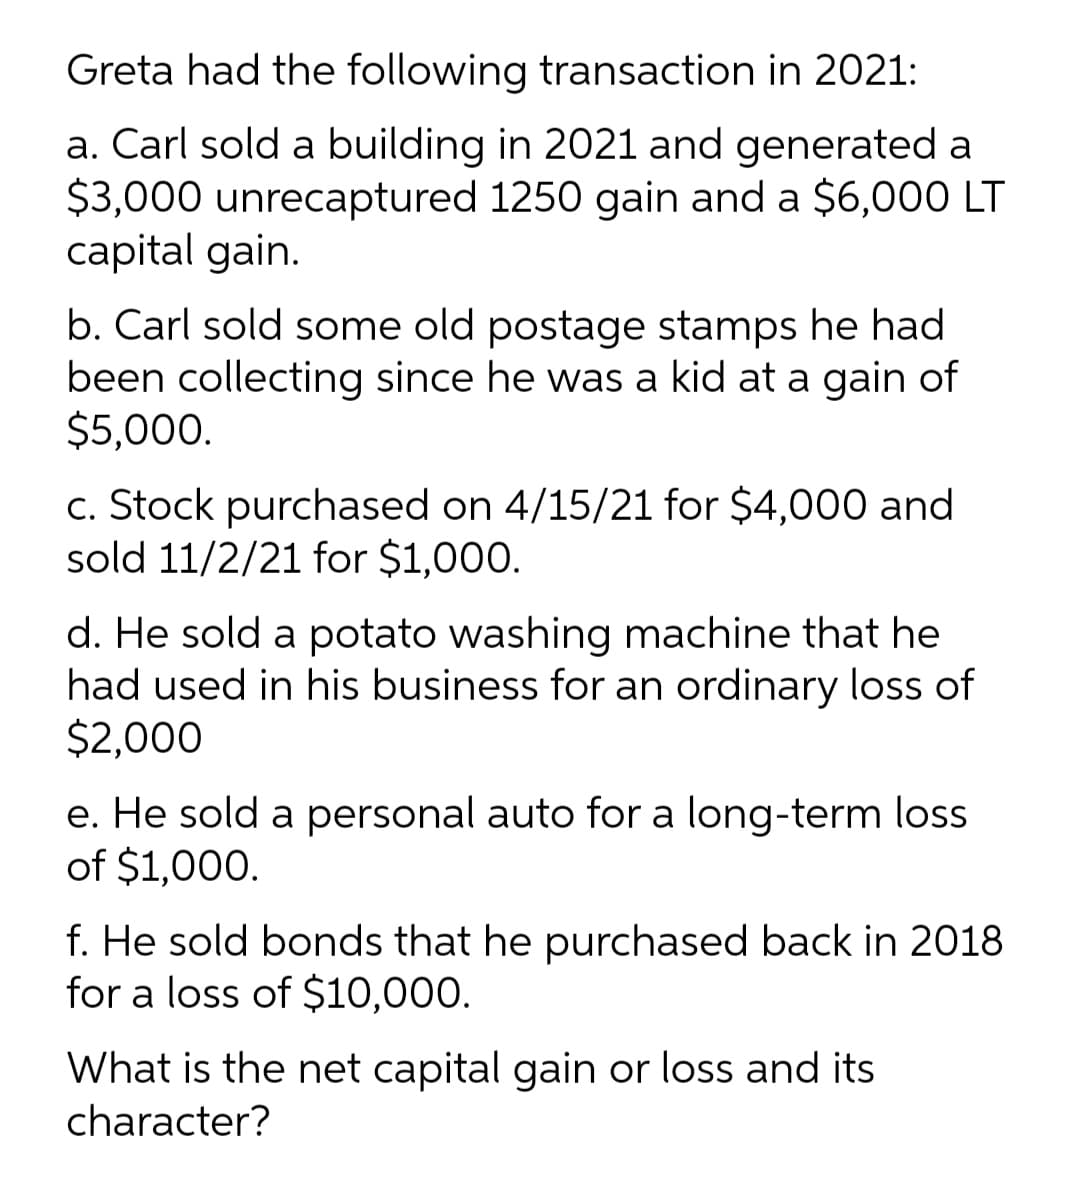 Greta had the following transaction in 2021:
a. Carl sold a building in 2021 and generated a
$3,000 unrecaptured 1250 gain and a $6,000 LT
capital gain.
b. Carl sold some old postage stamps he had
been collecting since he was a kid at a gain of
$5,000.
c. Stock purchased on 4/15/21 for $4,000 and
sold 11/2/21 for $1,000.
d. He sold a potato washing machine that he
had used in his business for an ordinary loss of
$2,000
e. He sold a personal auto for a long-term loss
of $1,000.
f. He sold bonds that he purchased back in 2018
for a loss of $10,000.
What is the net capital gain or loss and its
character?
